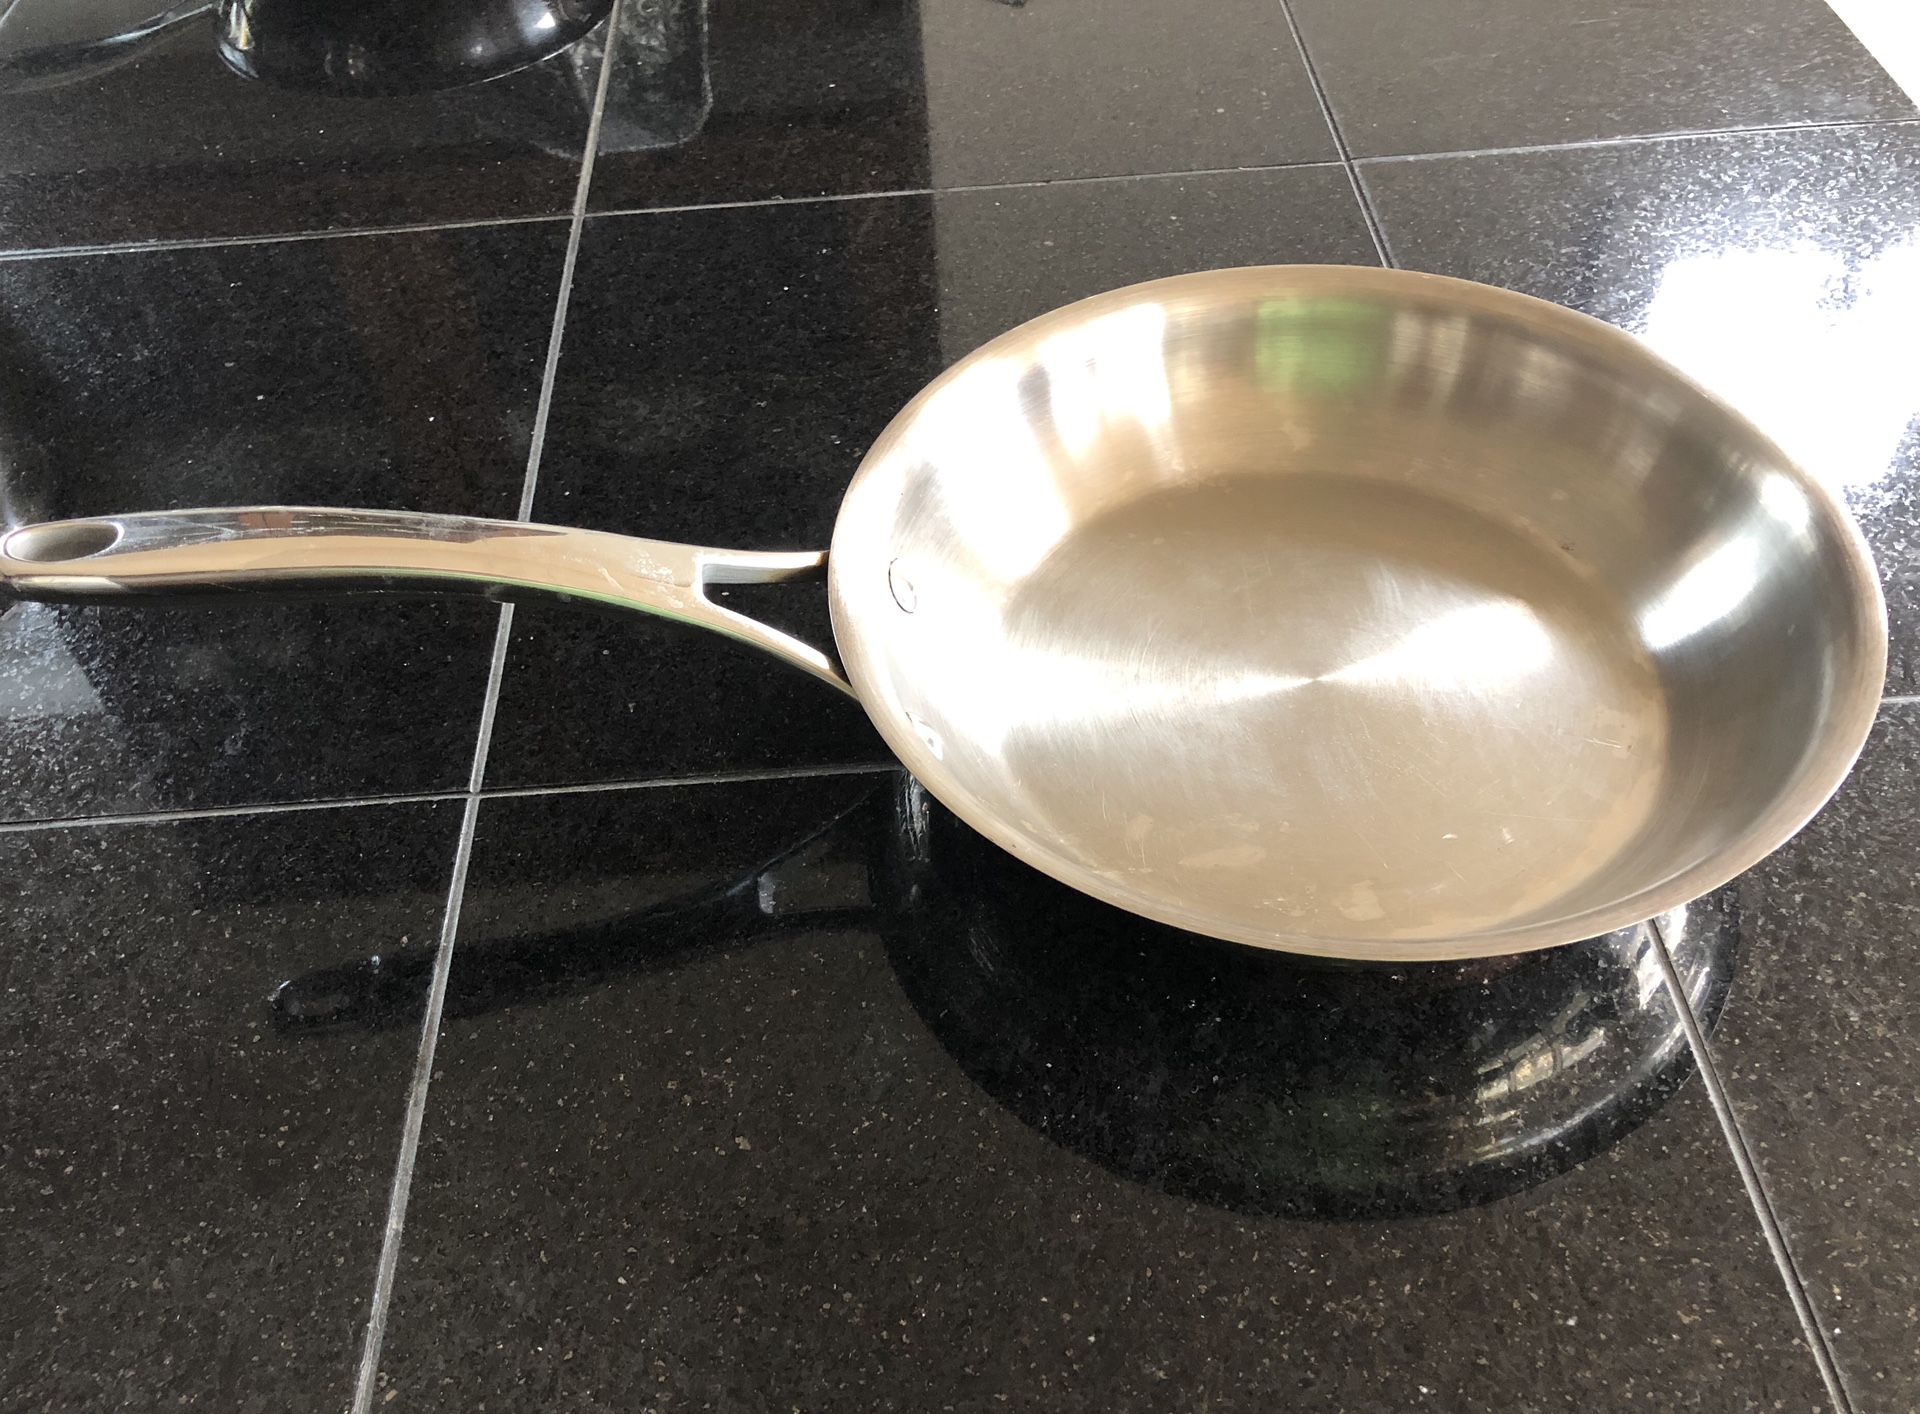 Kirkland Stainless Steel 10 Quart Stock Pot with Strainer/Steamer and Lid –  USED